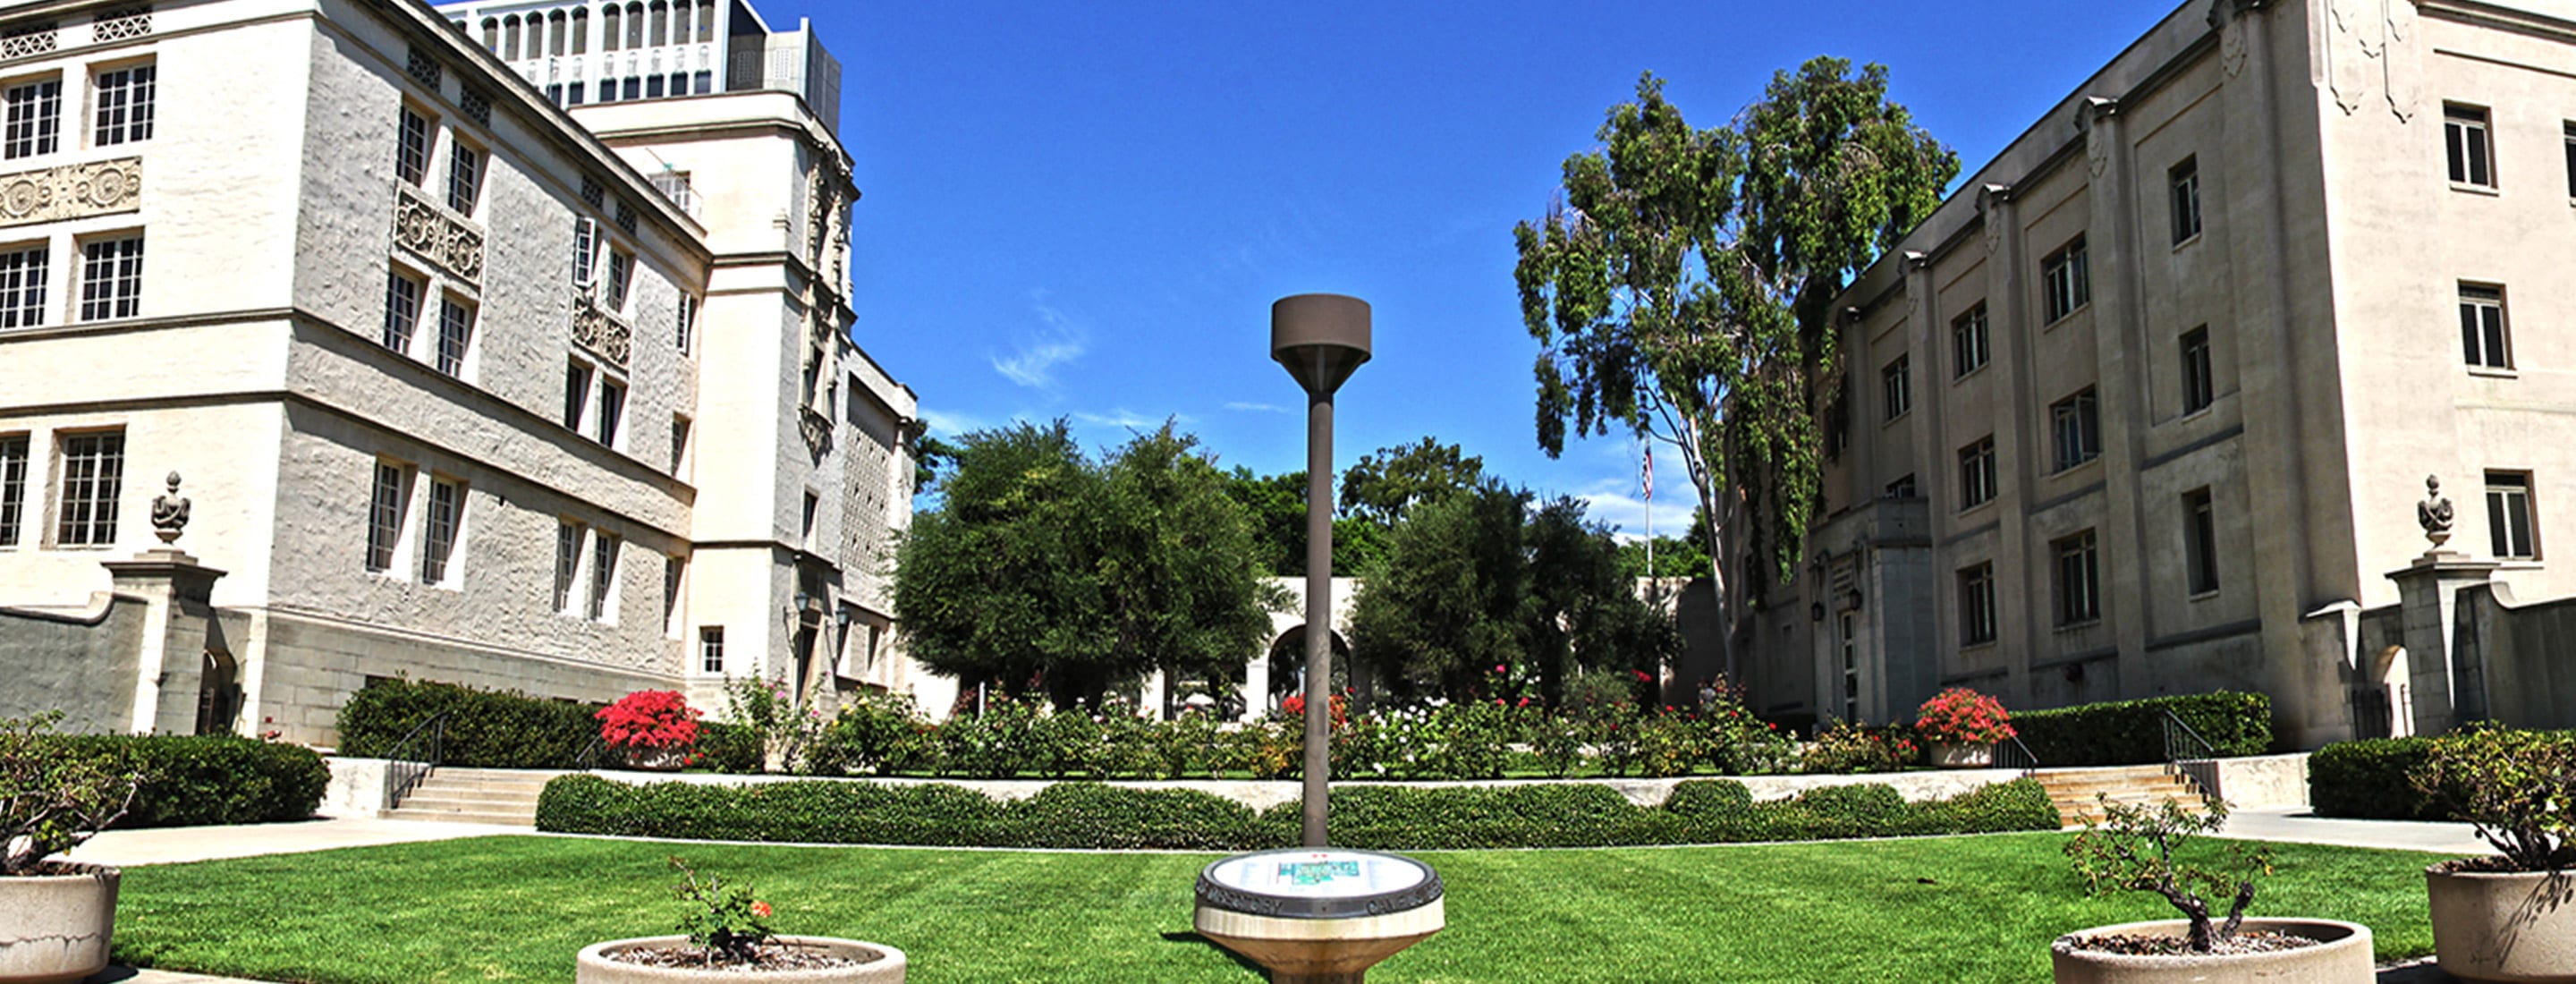 Picture of Caltech campus - courtyard view